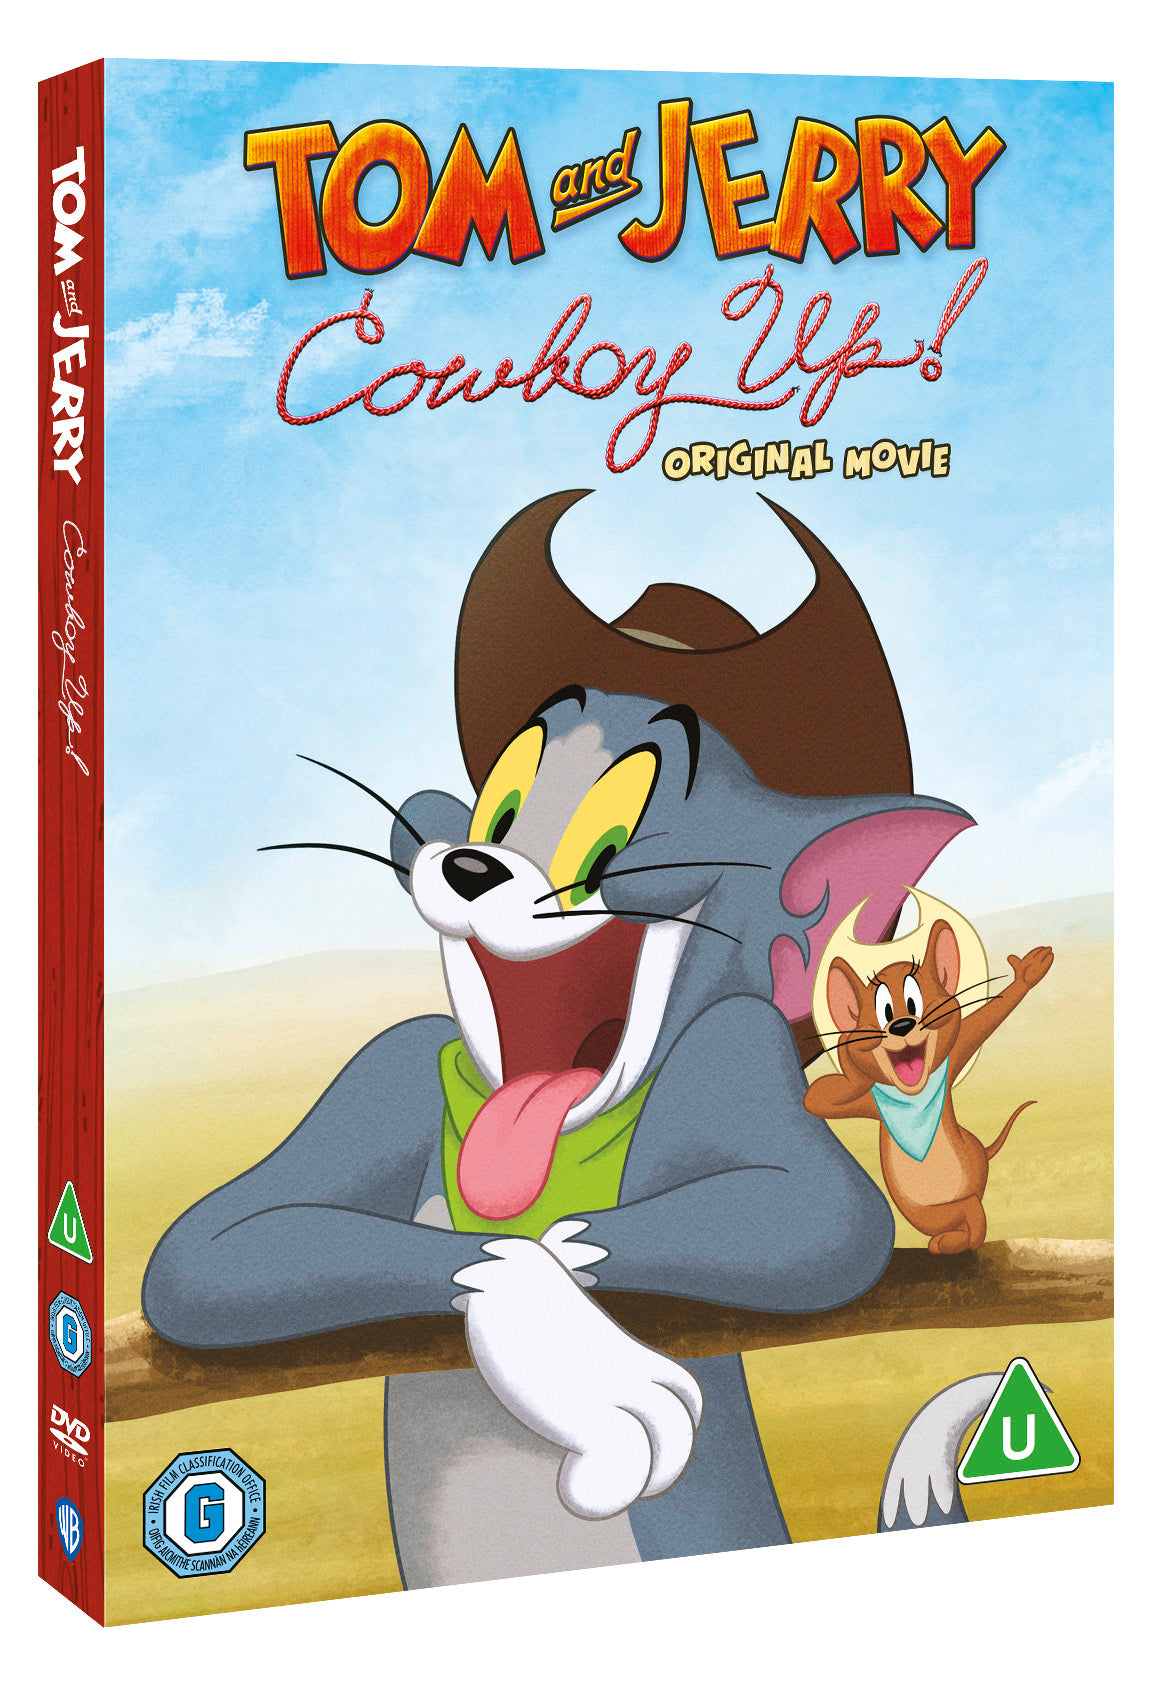 Tom and Jerry Cowboy Up! (DVD) (2022)